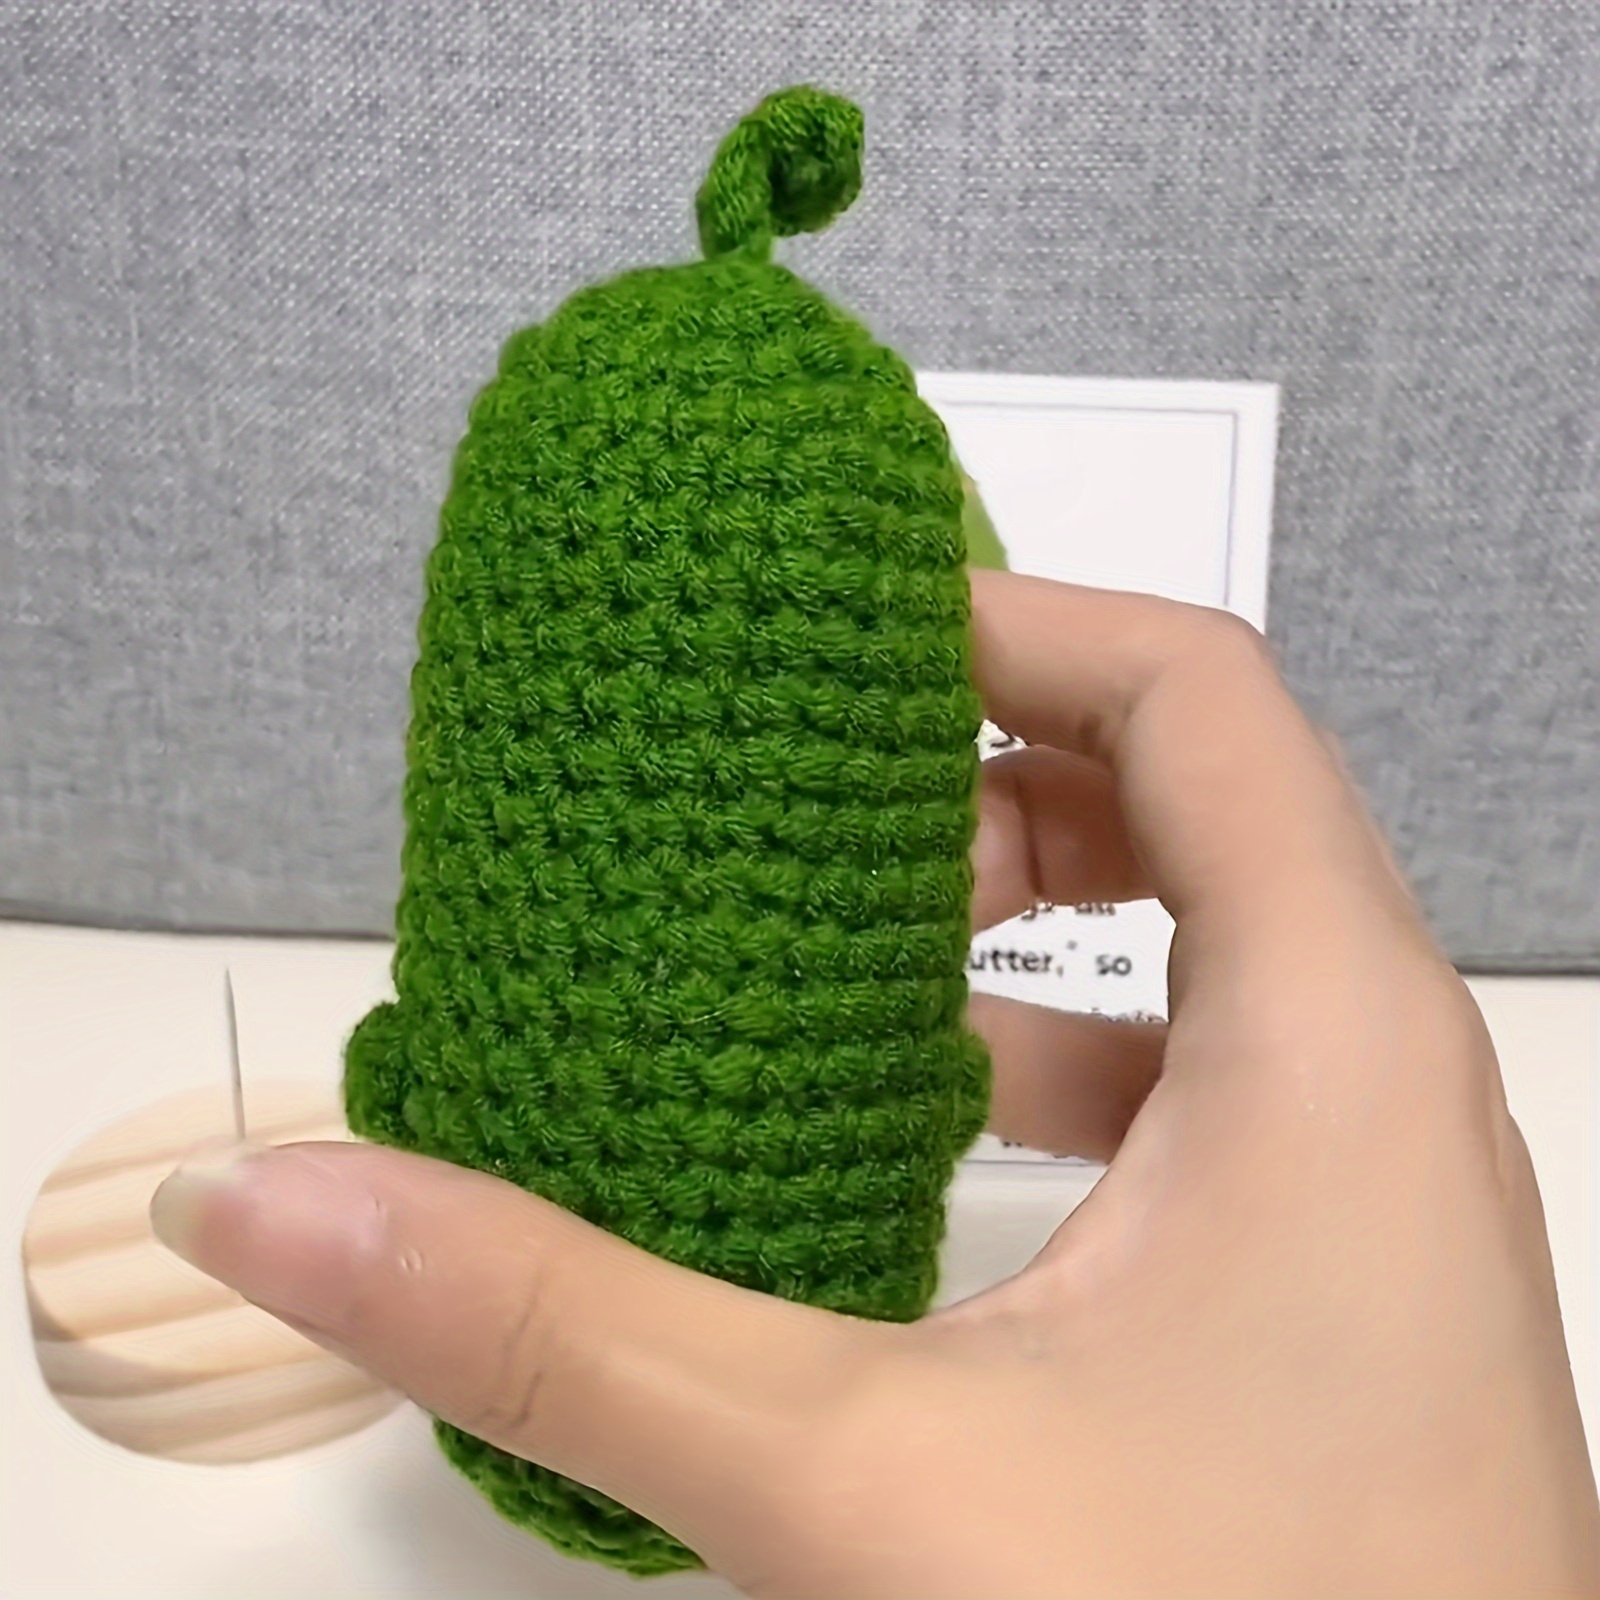 Adorable Pickled Cucumber Toy Handwoven Pickle Knitting Doll